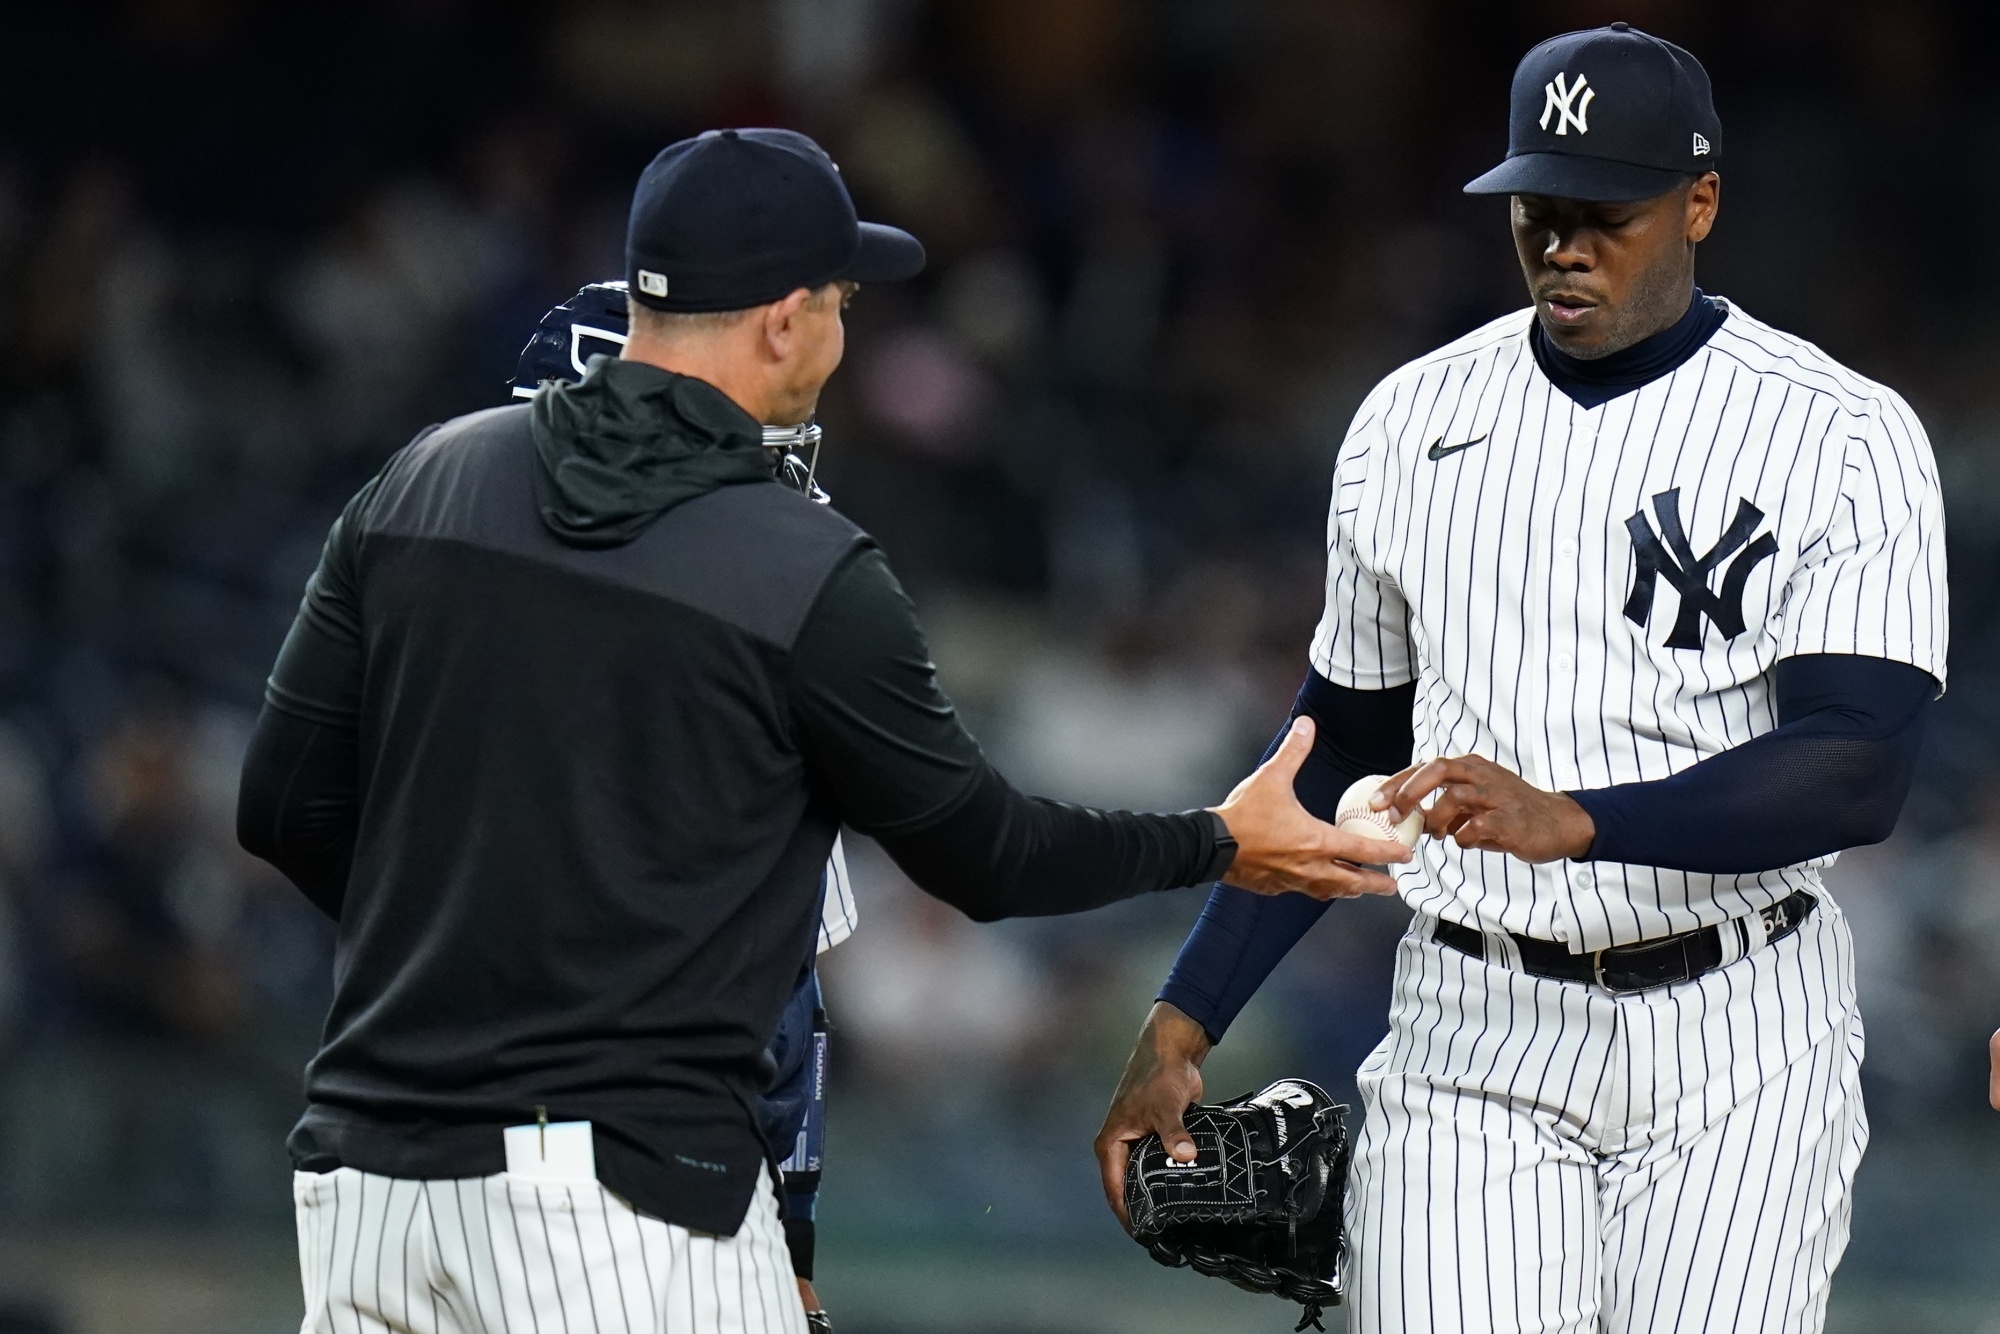 It's time for the Yankees to add an alternate uniform - Unhinged New York